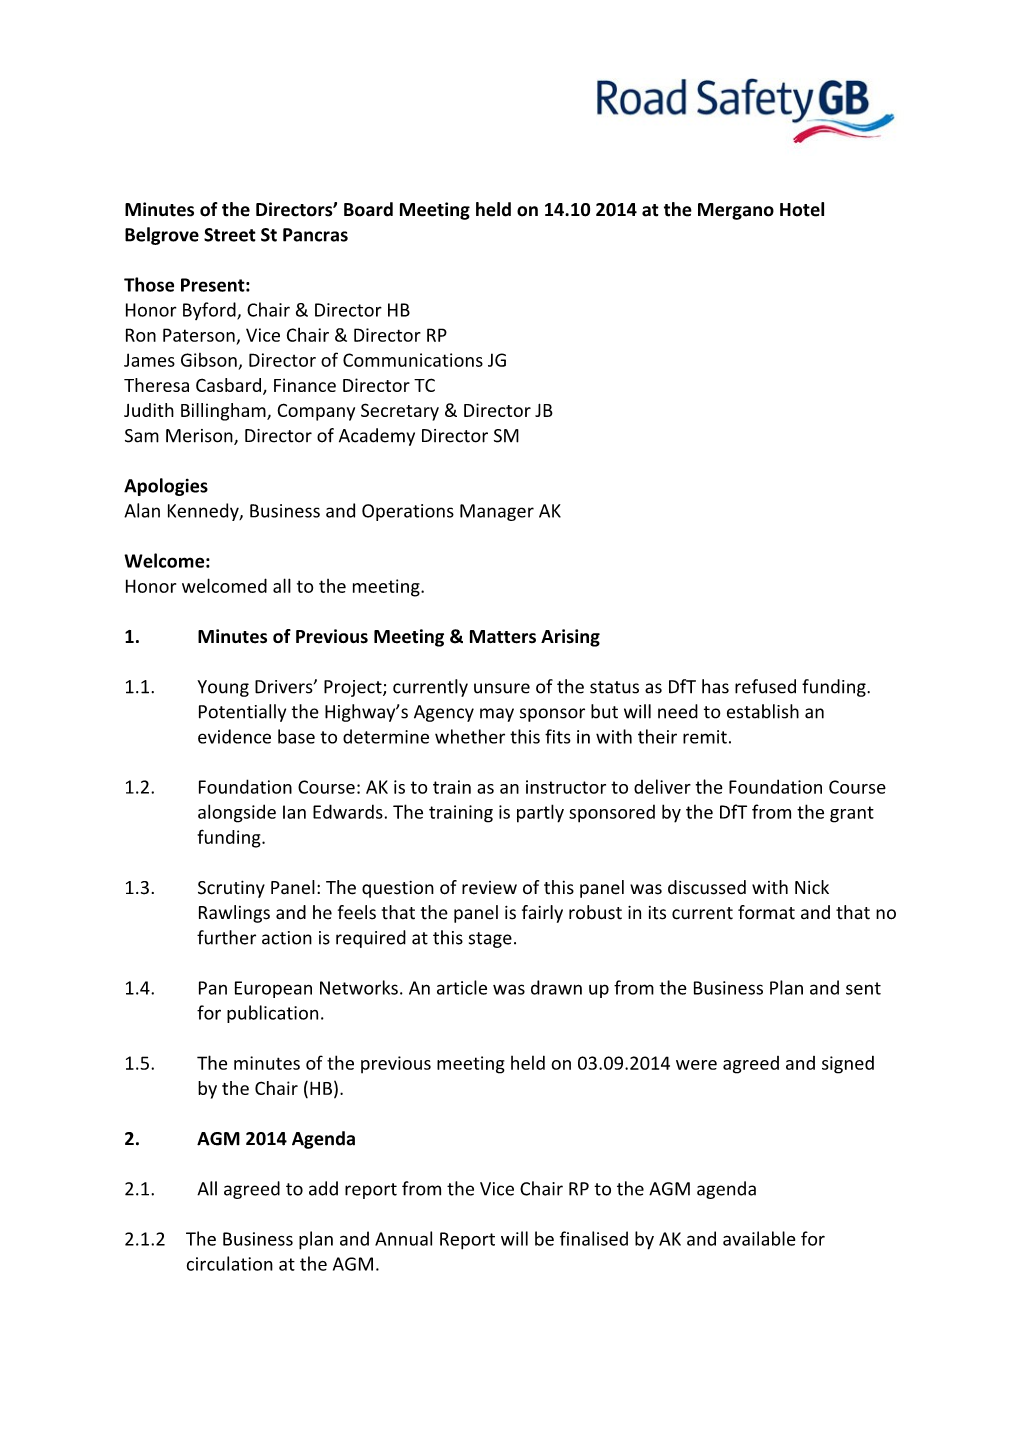 Minutes of the Directors Board Meeting Held on 14.10 2014 at the Mergano Hotel Belgrove